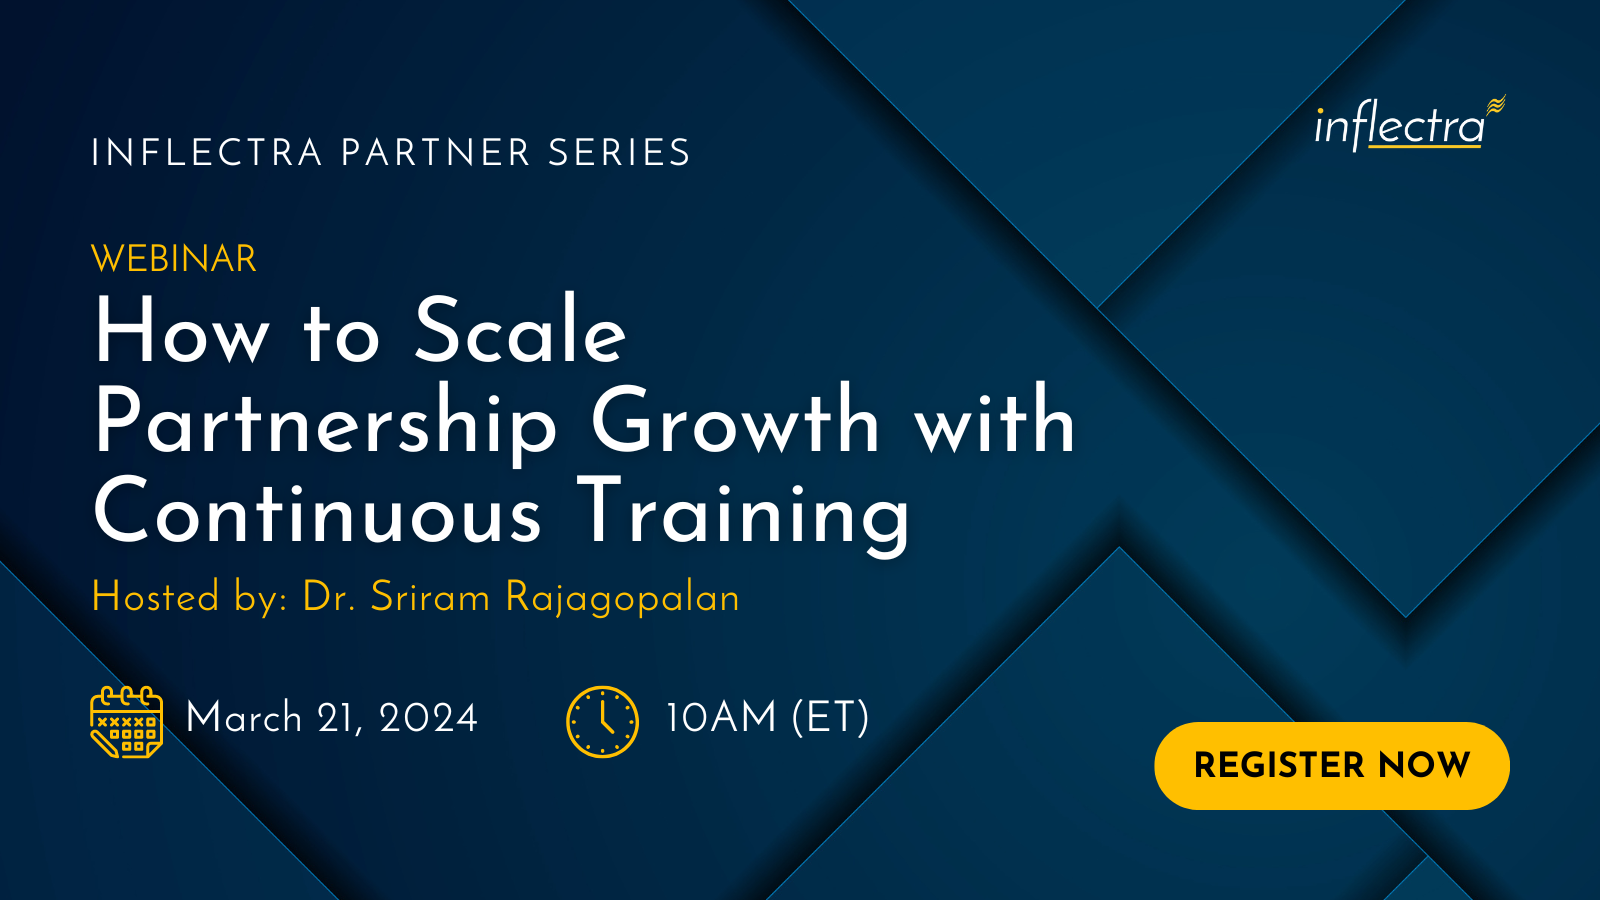 inflectra-partner-webinar-series-how-to-scale-partnership-growth-with-continuous-training-with-sriram-rajagopalan-image